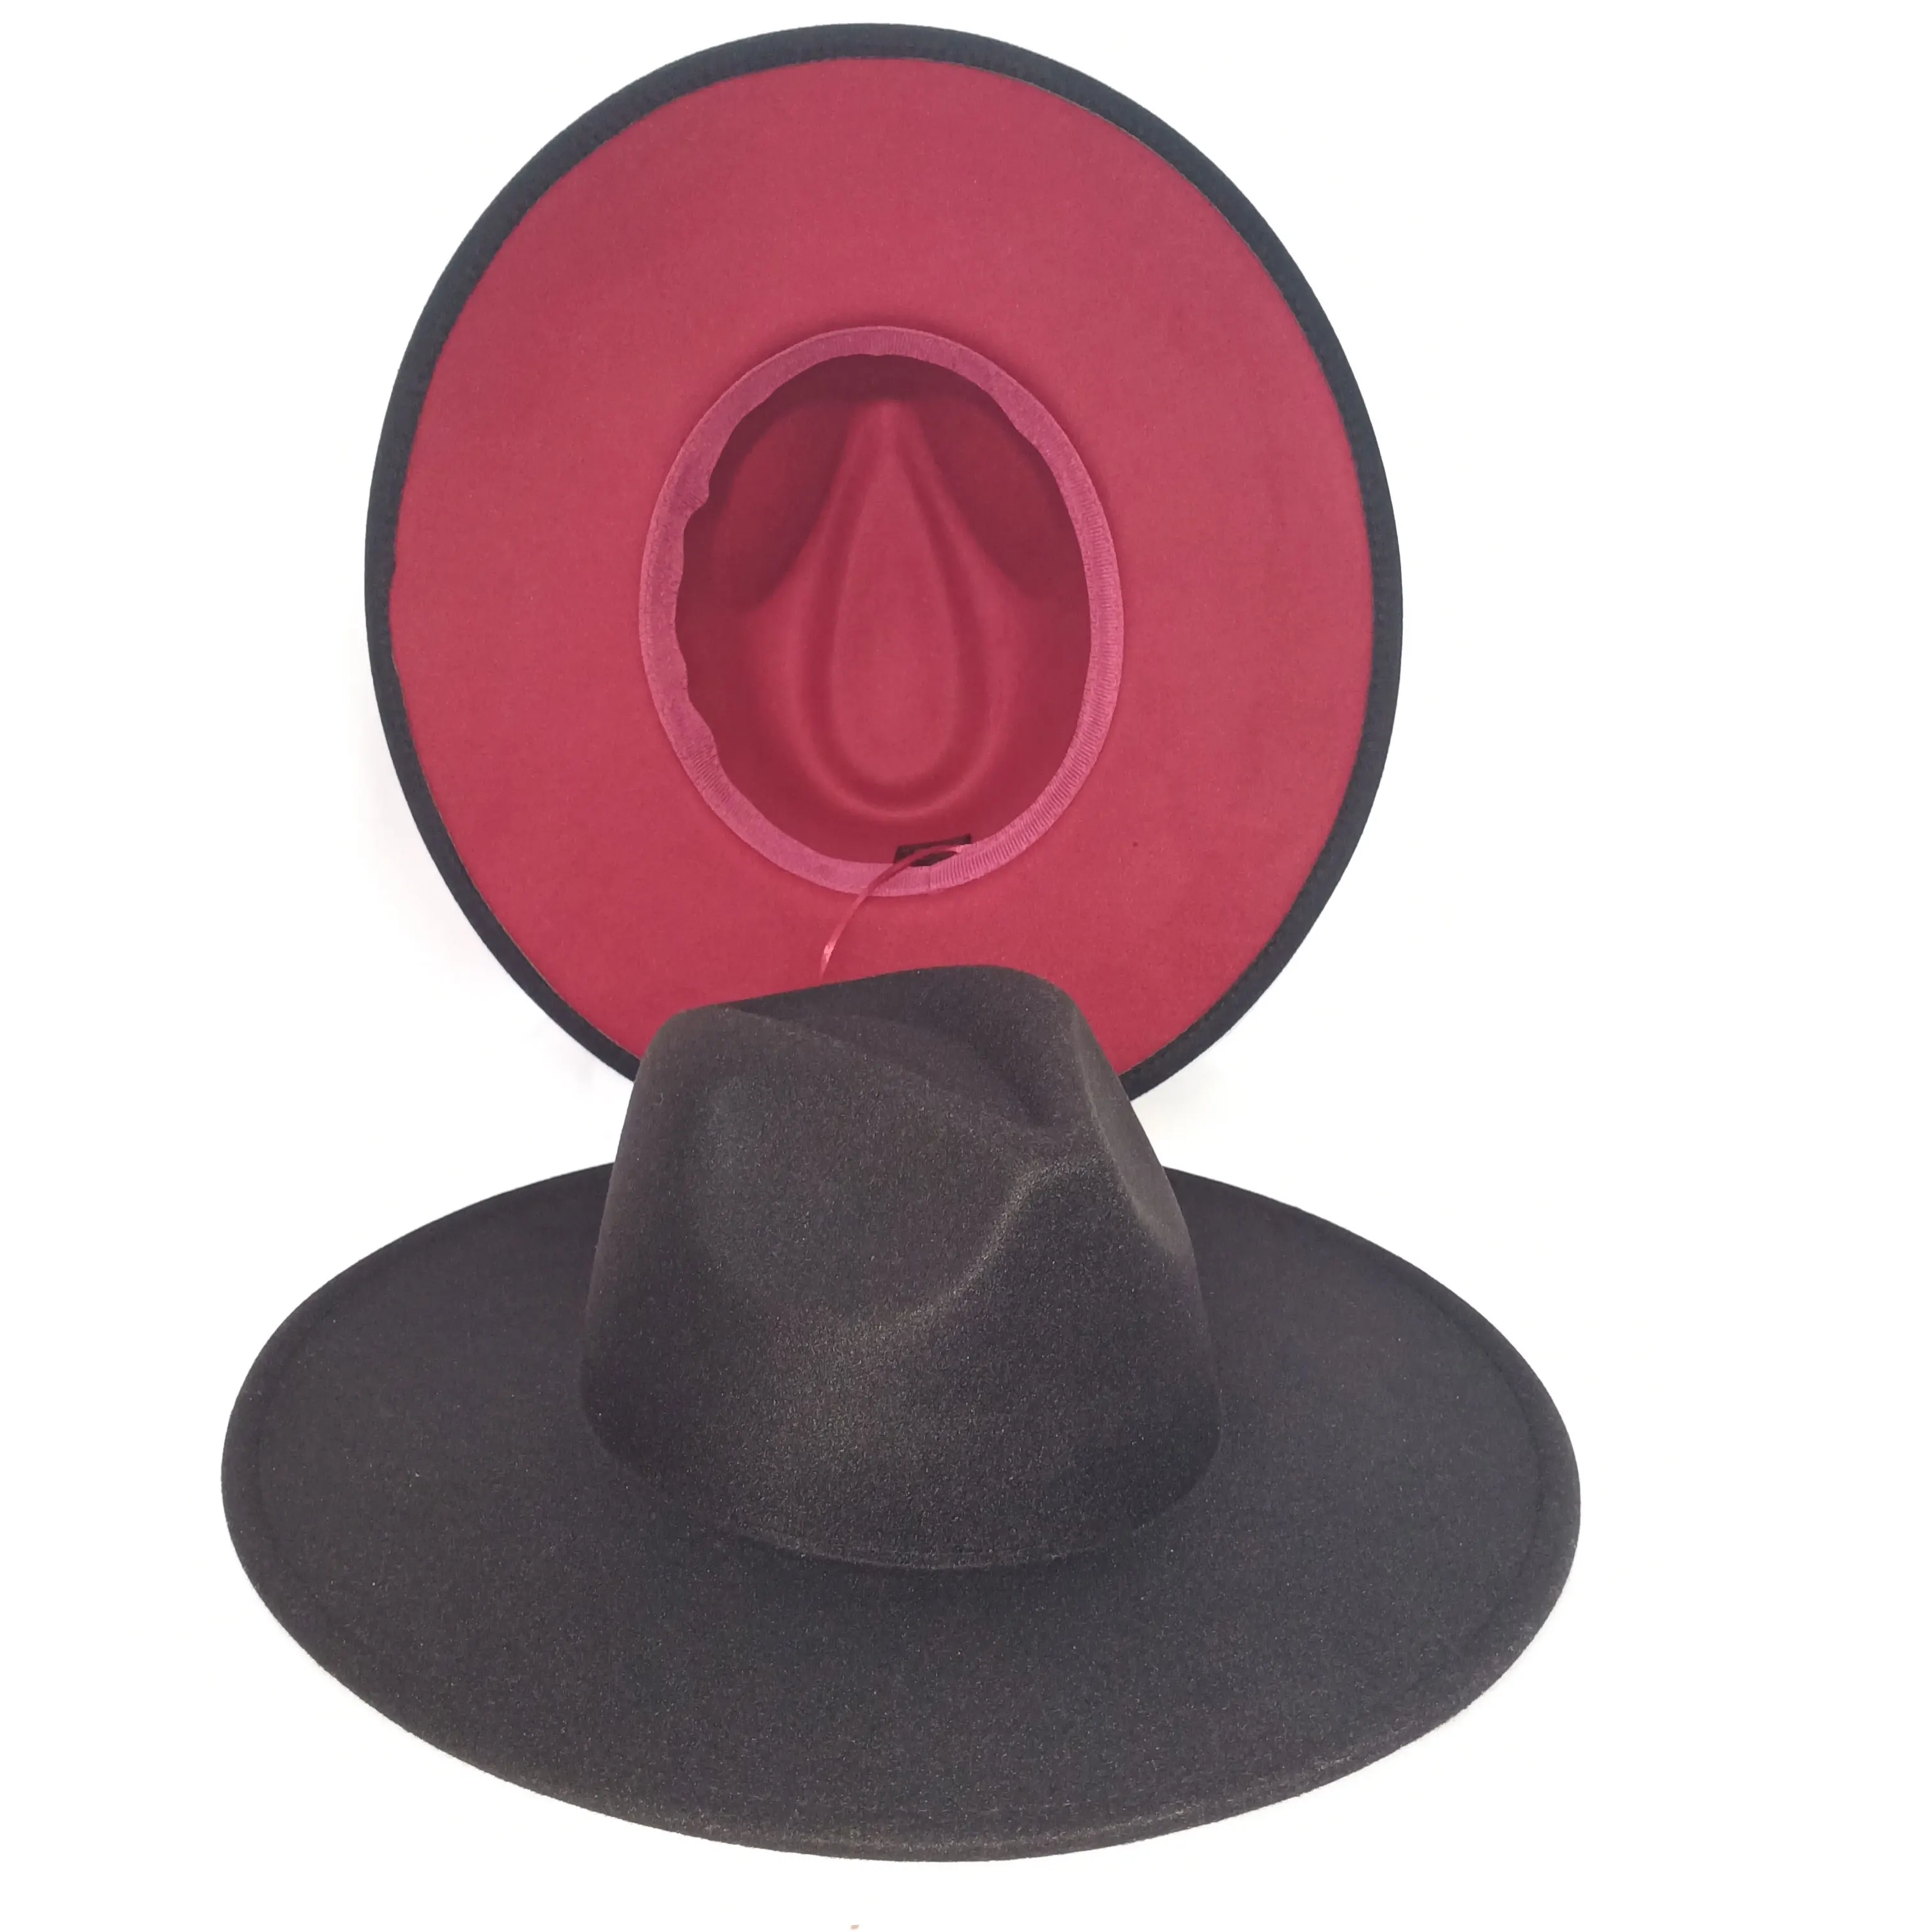 

New Mangosteen Color Fedoras Hat For Women Unisex Tuo-toned Cowboy Hat Panama Church Performance Cap Fedora Wide Brim 10CM шапка